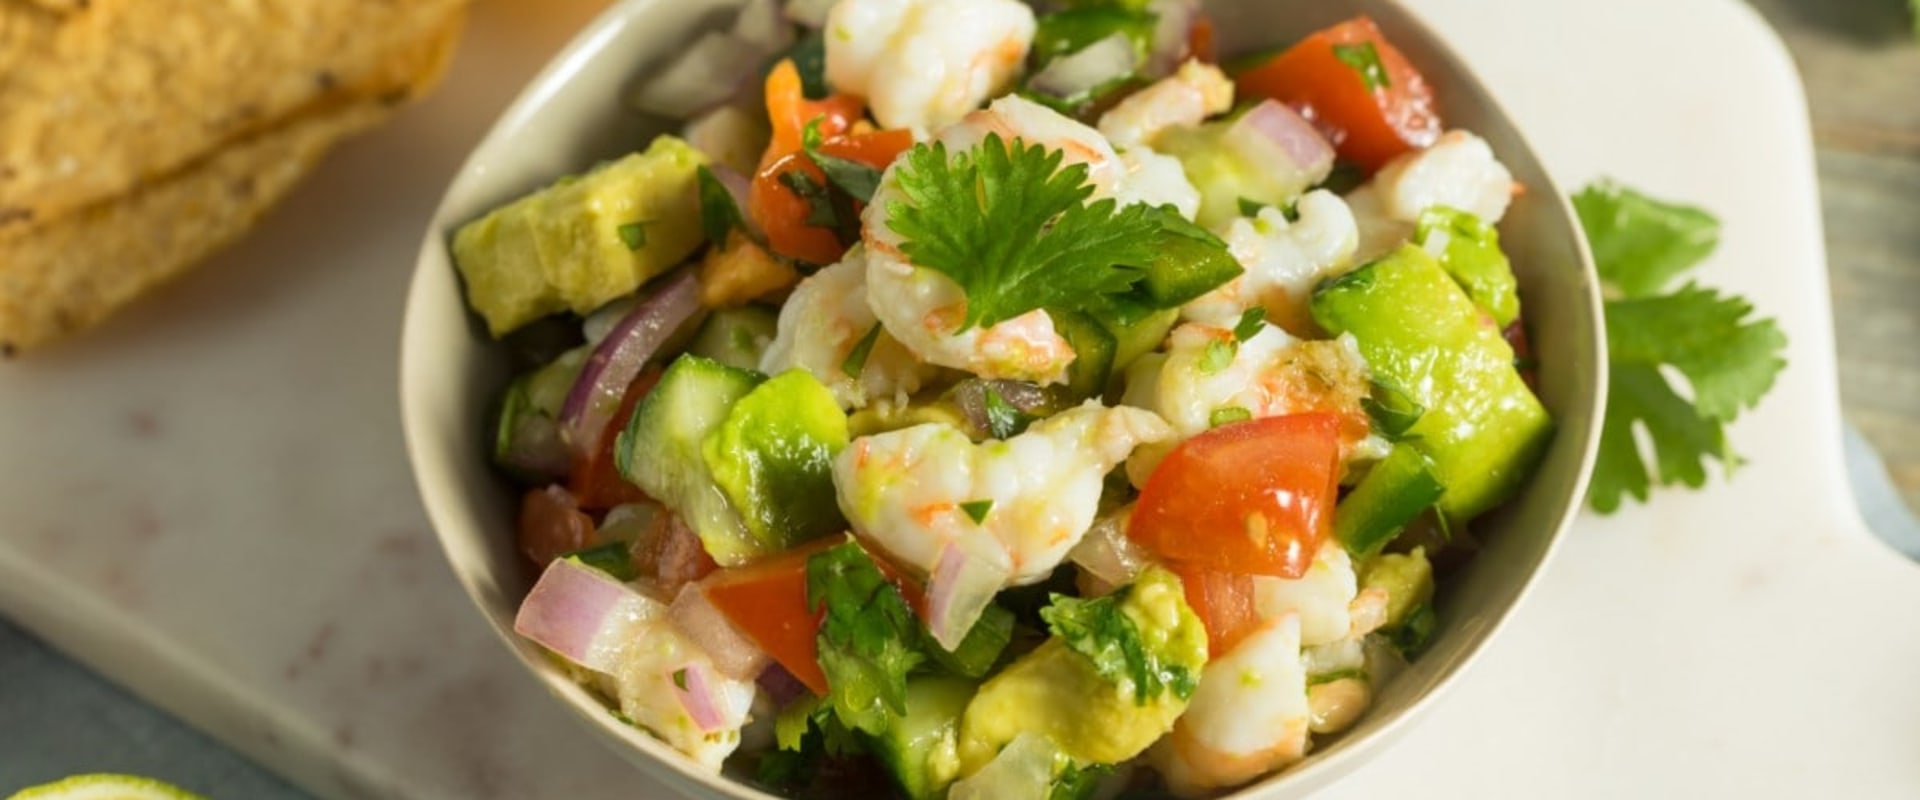 Fusion Ceviche with Abalone and Avocado: A Delicious Chinese Seafood Dish